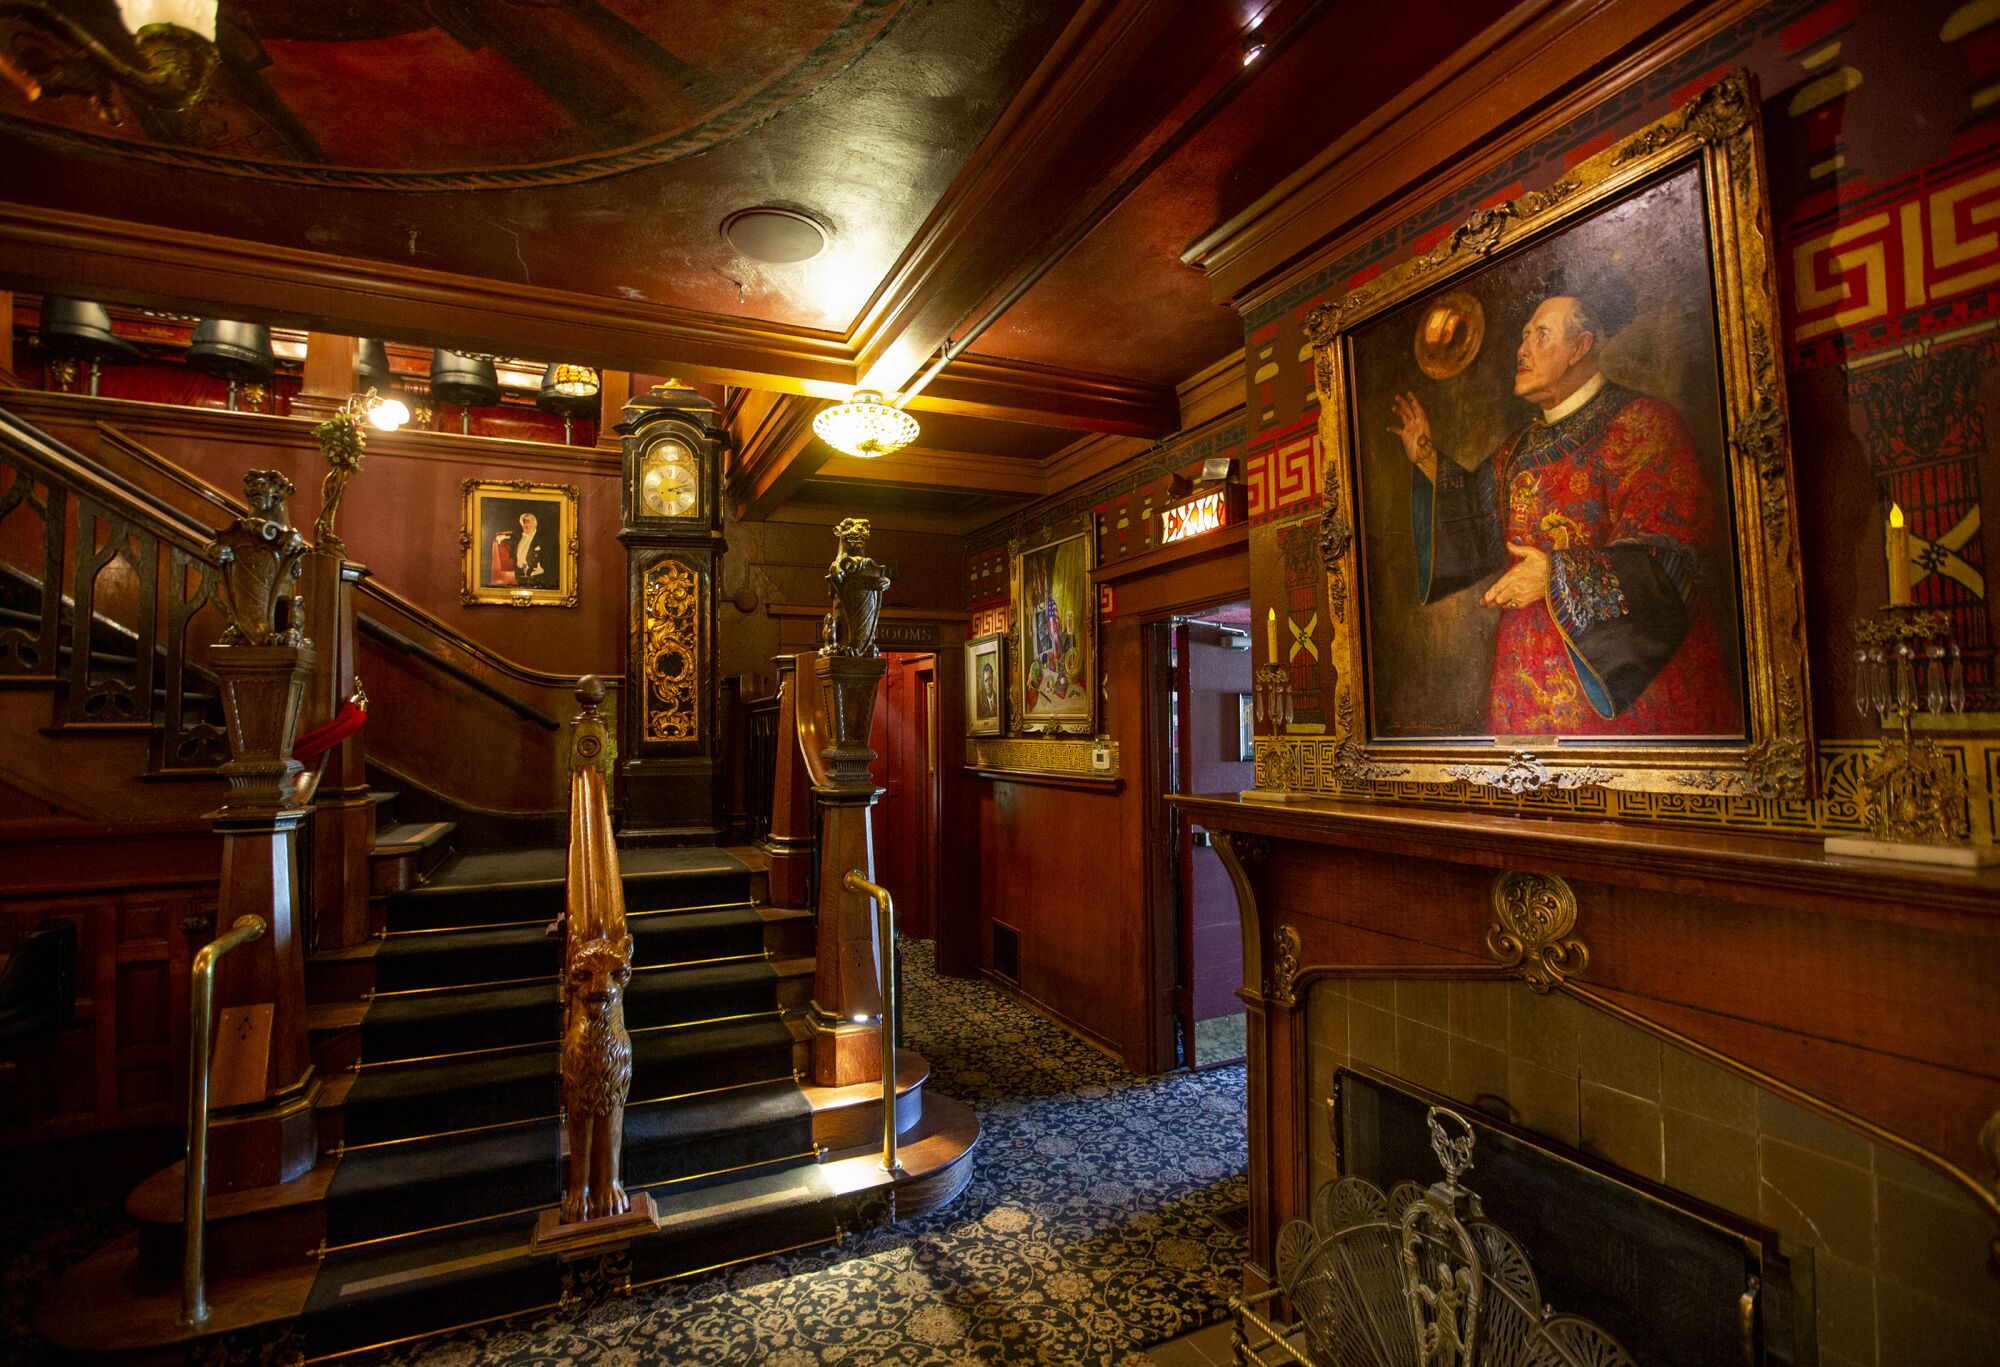 The Magic Castle's central staircase.